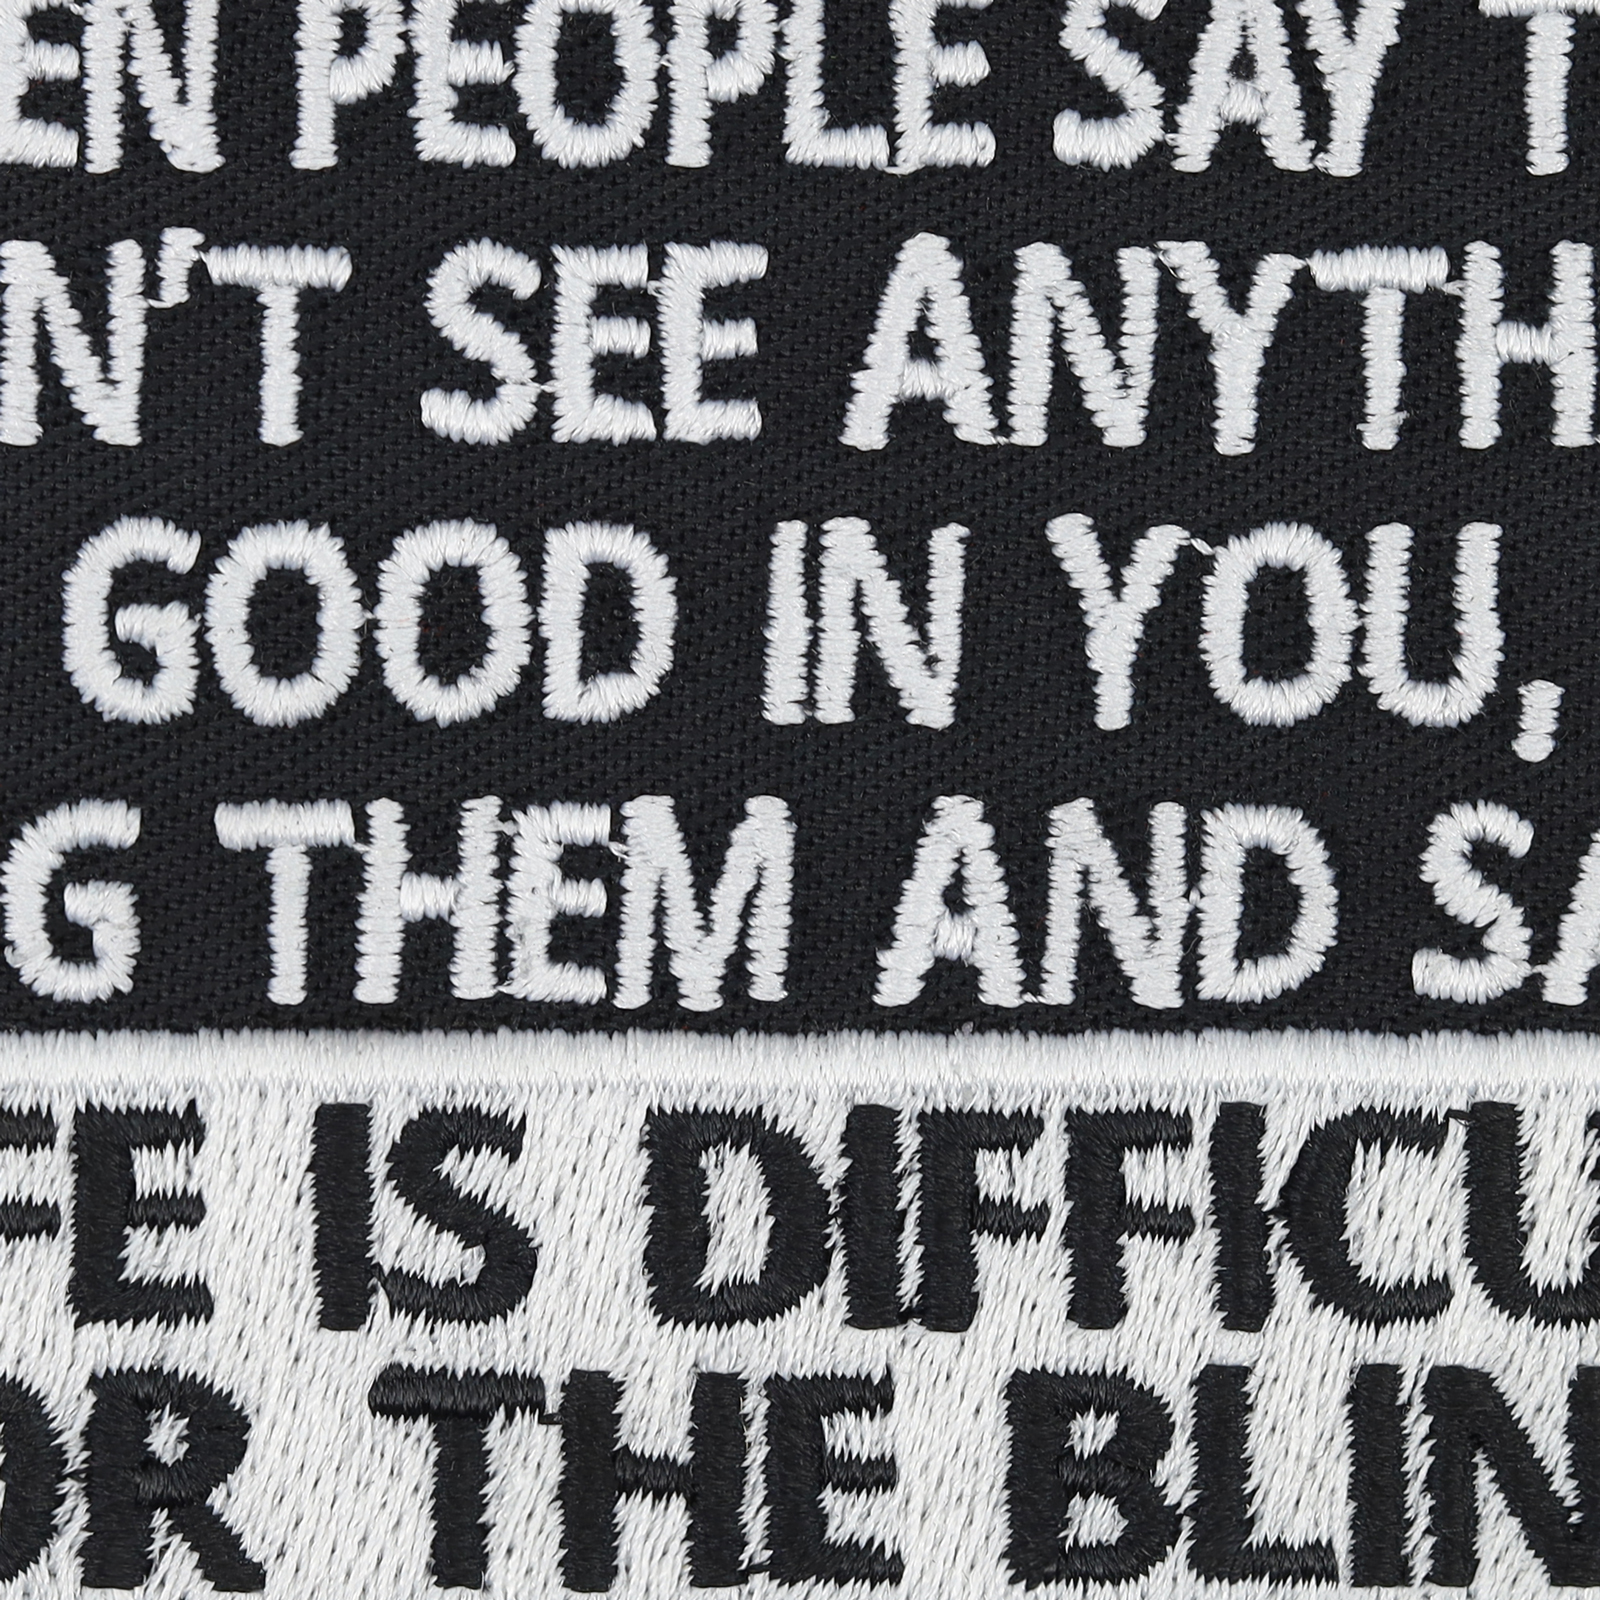 When people say they can't see anything good in you, hug them and say: Life is difficult for the blind! - Patch